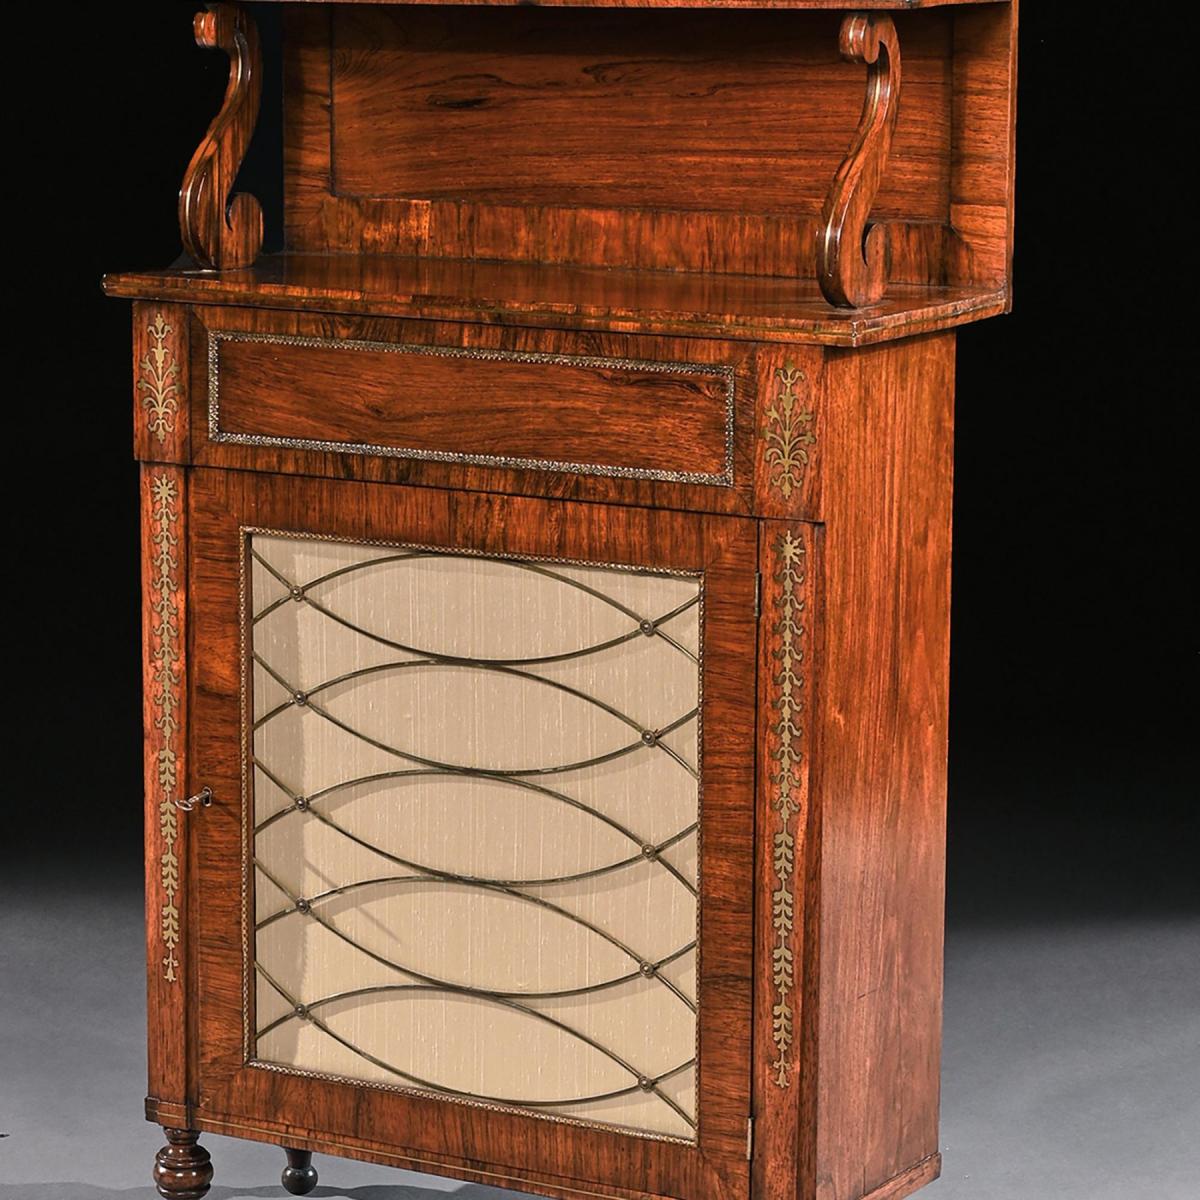 Regency Brass Inlaid Rosewood Chiffonier Of Narrow Proportions